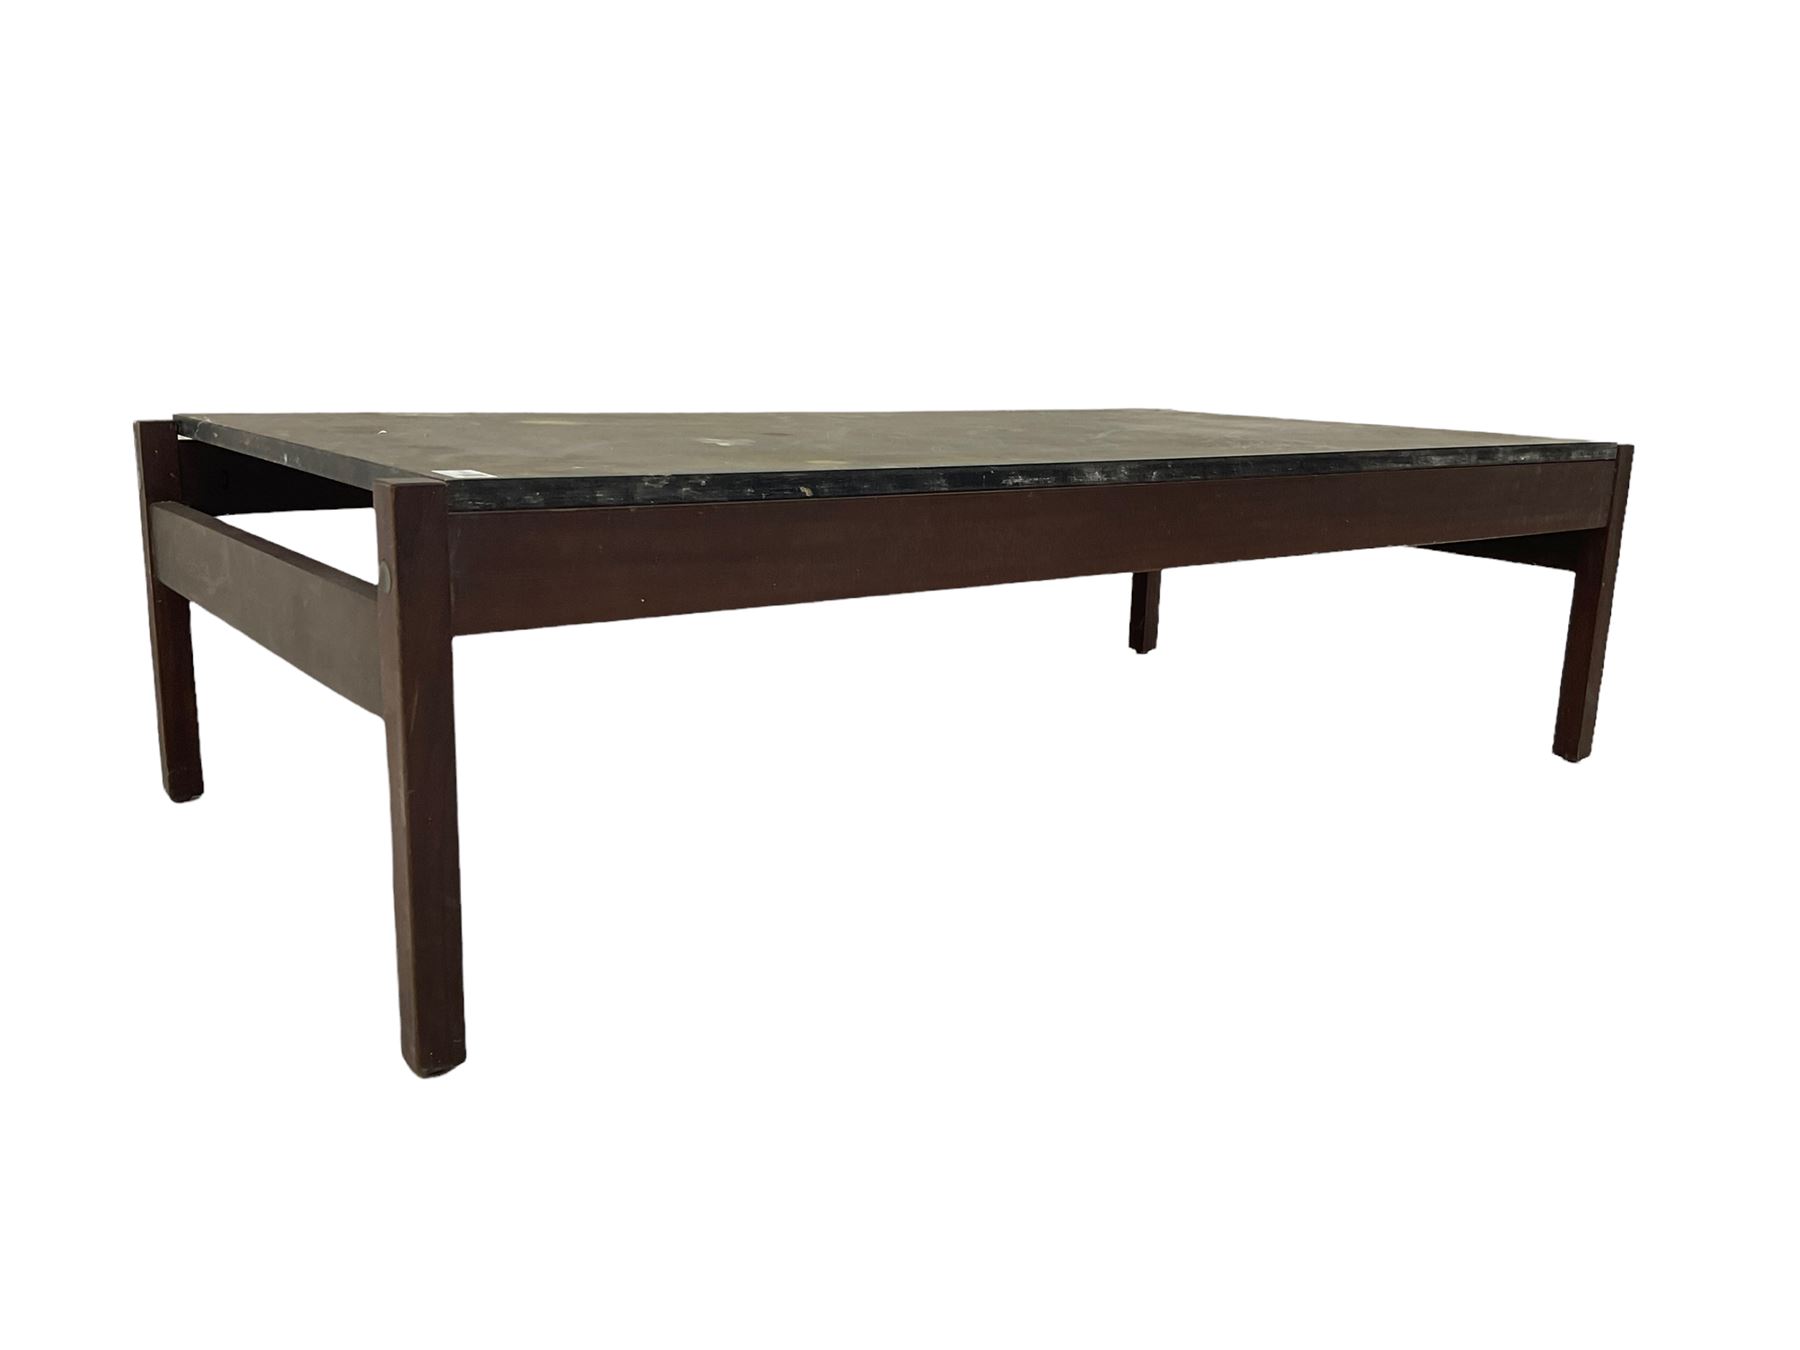 Mid-20th century rectangular teak coffee table with black lacquered top (117cm x 61cm - Image 2 of 8